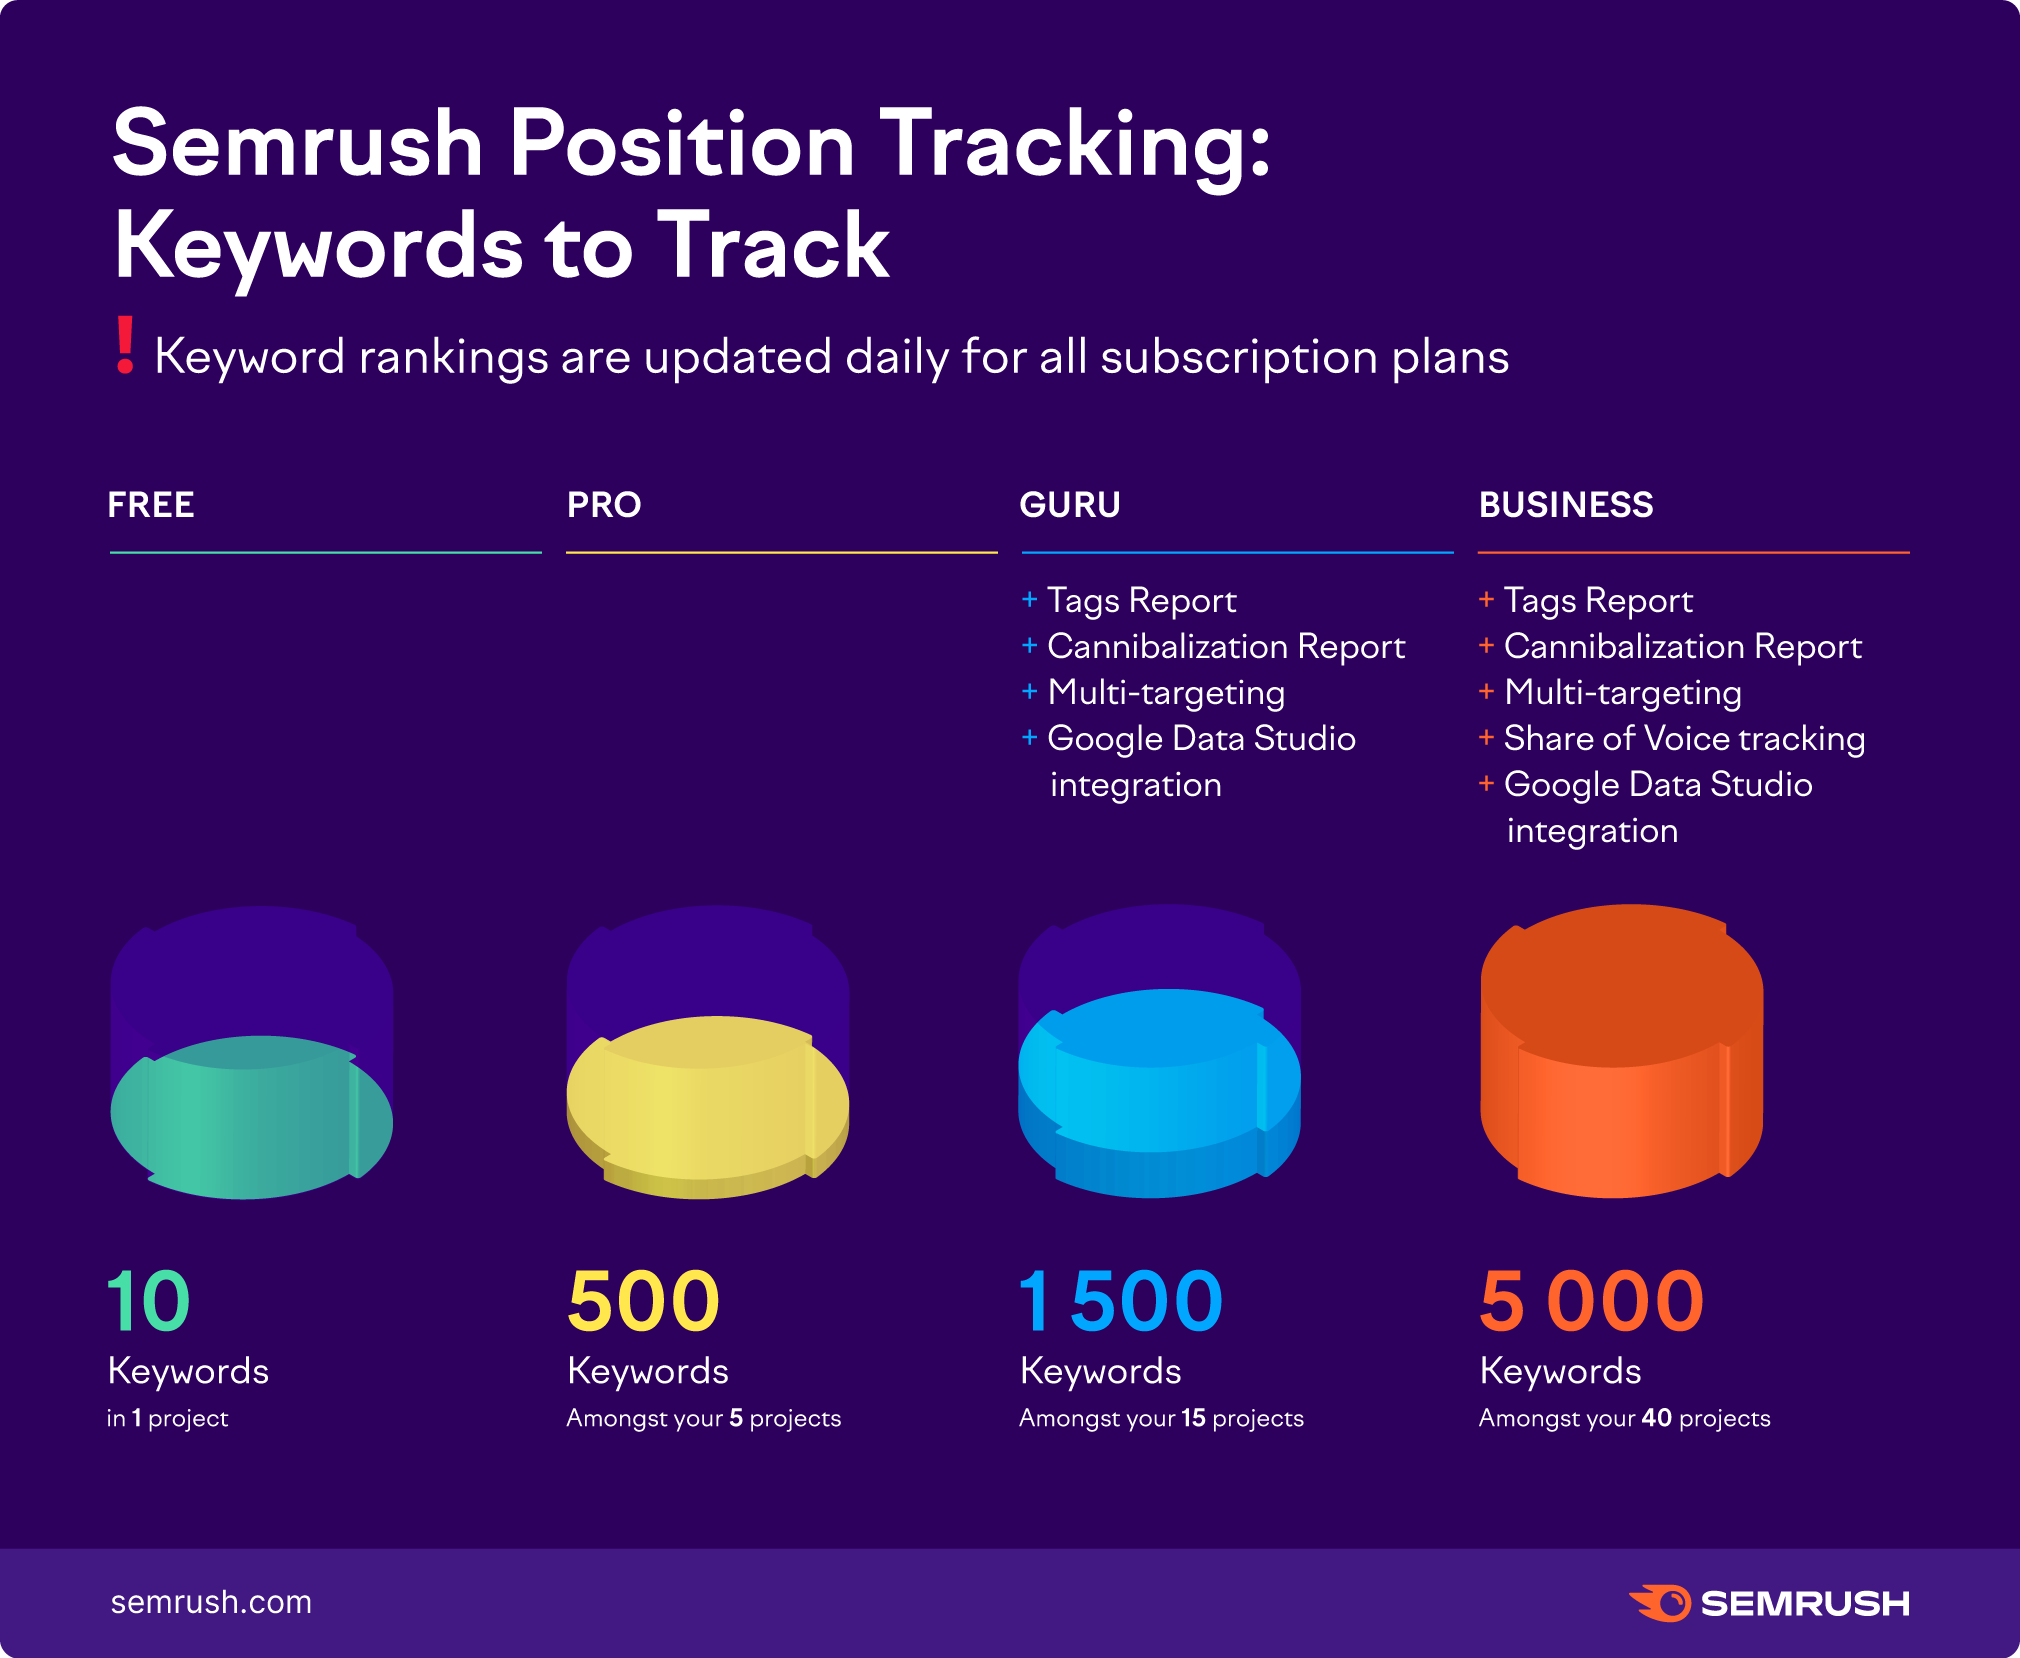 Semrush Position Tracking: keywords to track limits. Free plan: 10 keywords in 1 Project. Pro plan: 500 keywords amongst your 5 Projects. Guru: 1500 keywords amongst 15 Projects. Business plan: 5000 keywords amongst 40 Projects. 